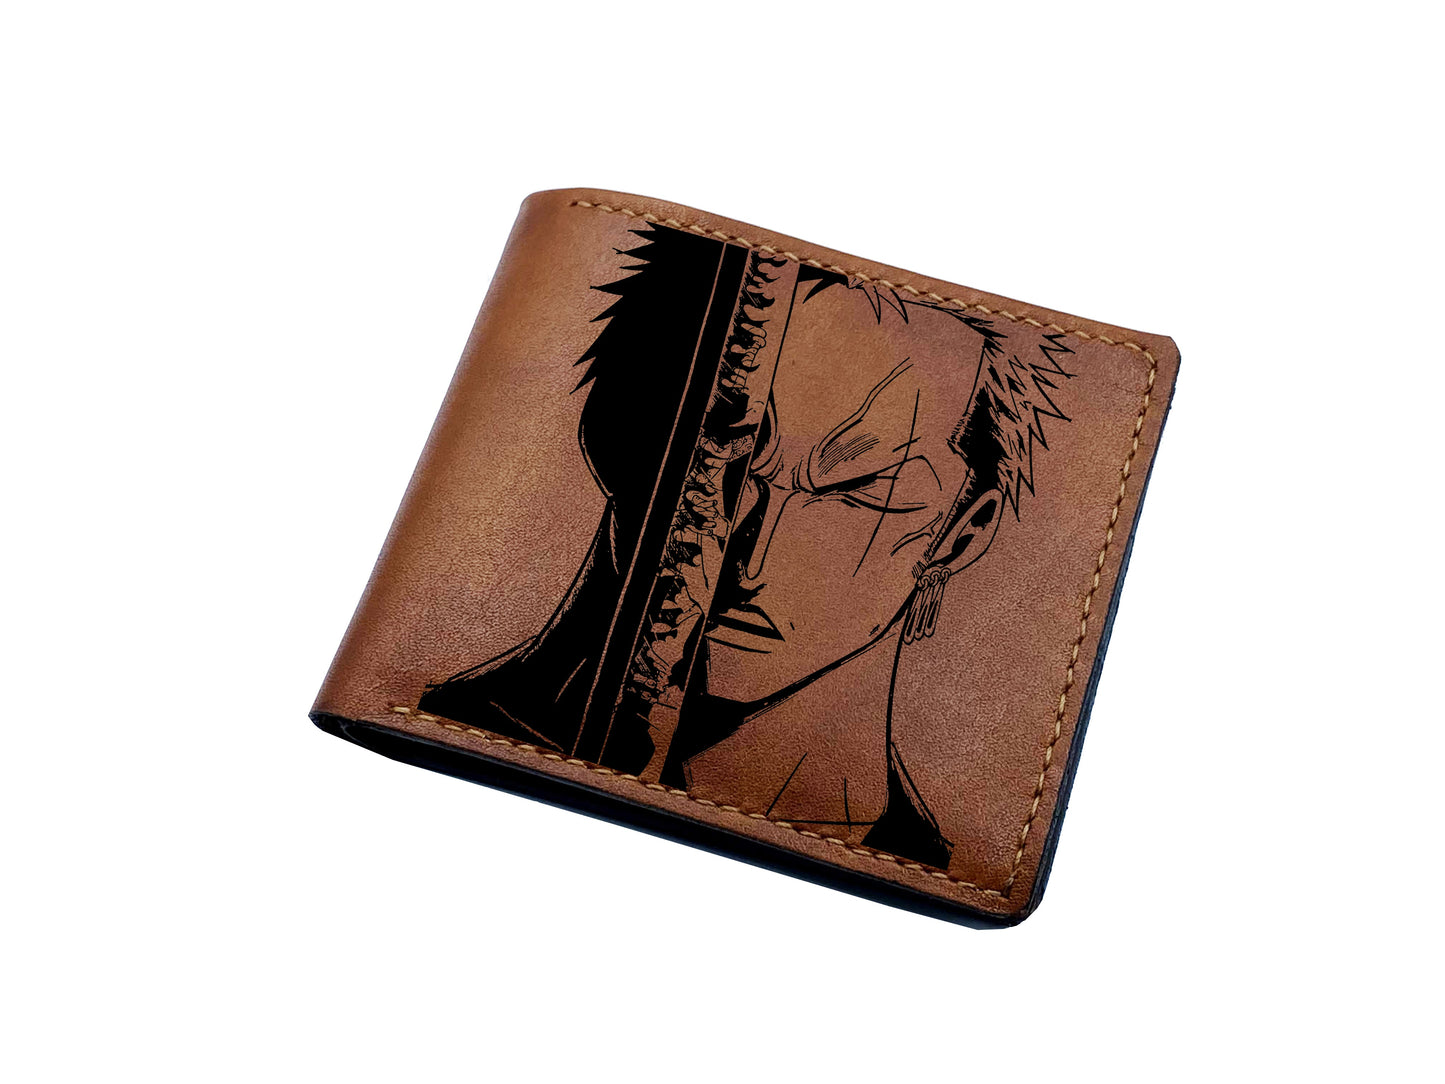 Personalized leather handmade wallet, anime pattern gift, One Piece leather men's wallet, leather anniversary gift idea for brother, husband, boyfriend